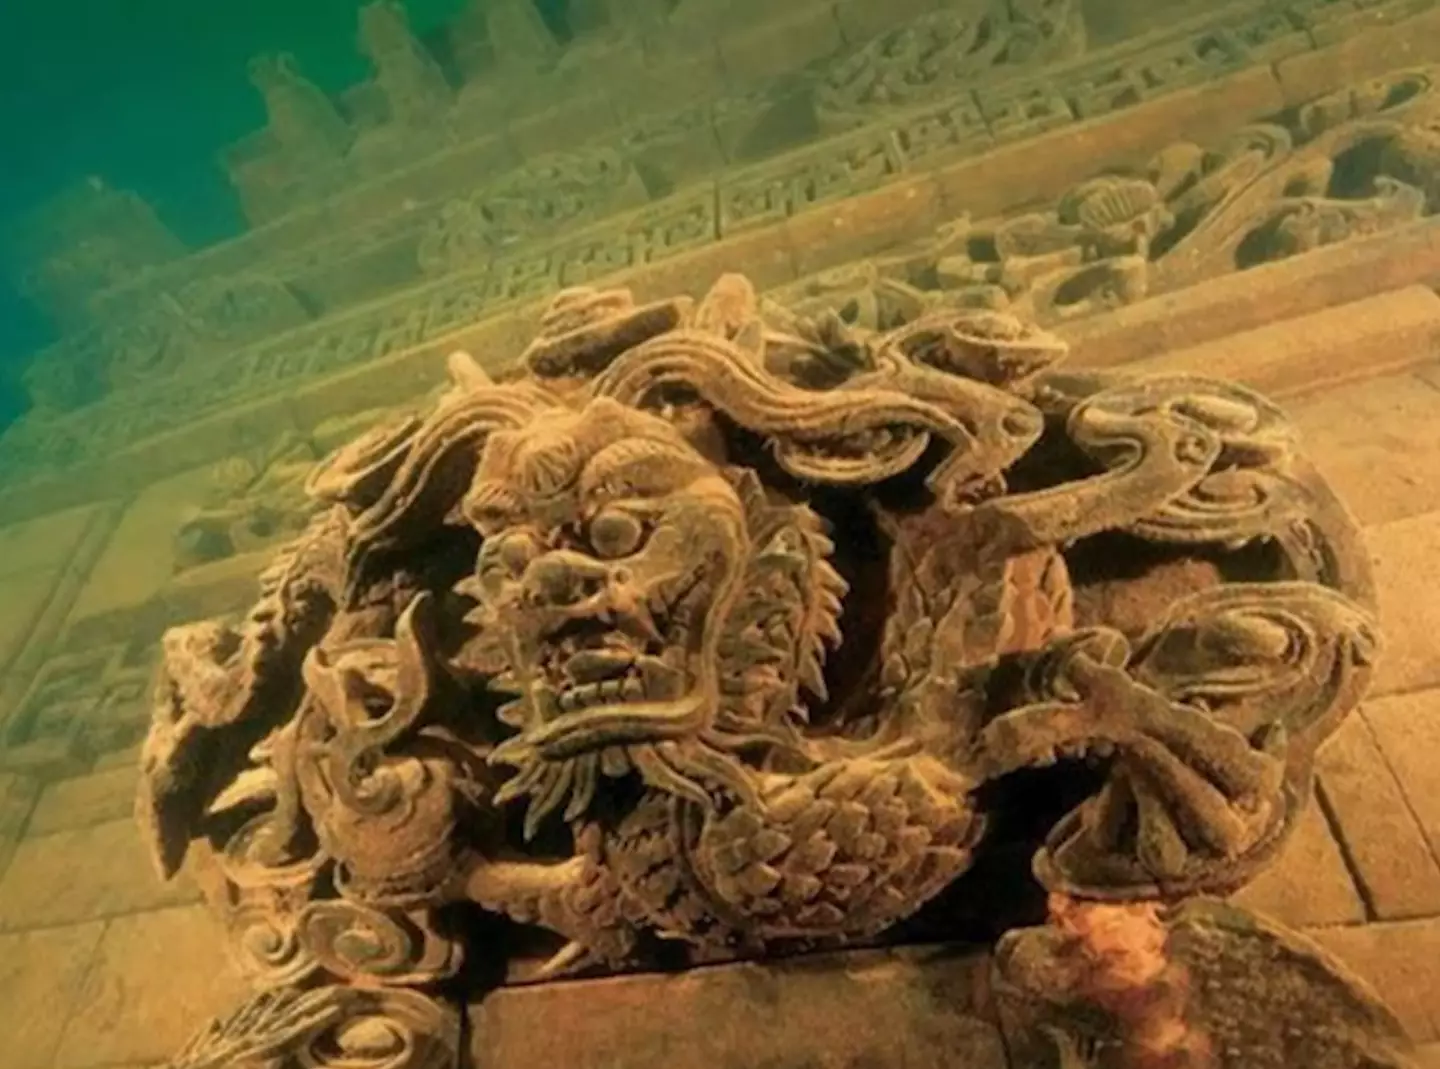 Being underwater has preserved much of the submerged city.